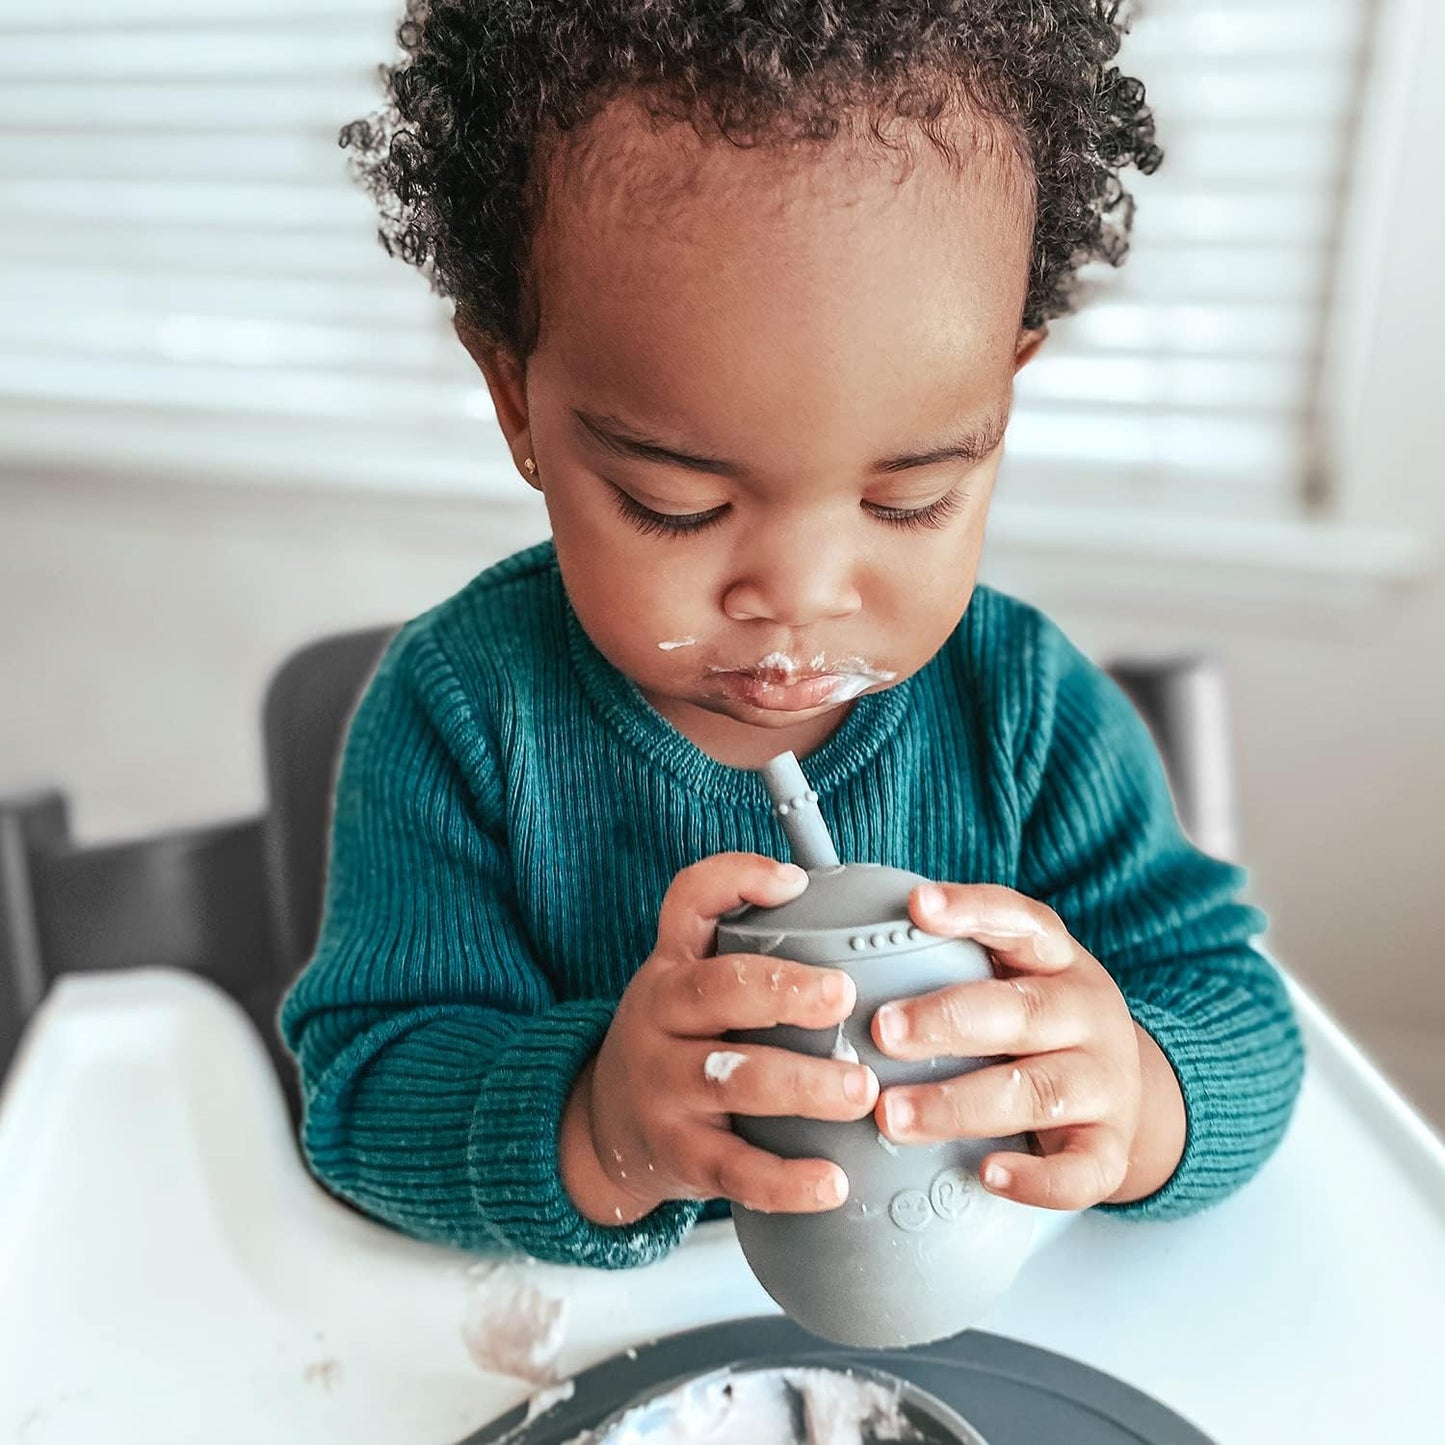 ez pz Tiny Cup (Gray) - 100% Silicone Training Cup for Infants - Designed by a Pediatric Feeding Specialist - 4 months+ - Baby-led Weaning Gear & Baby Gift